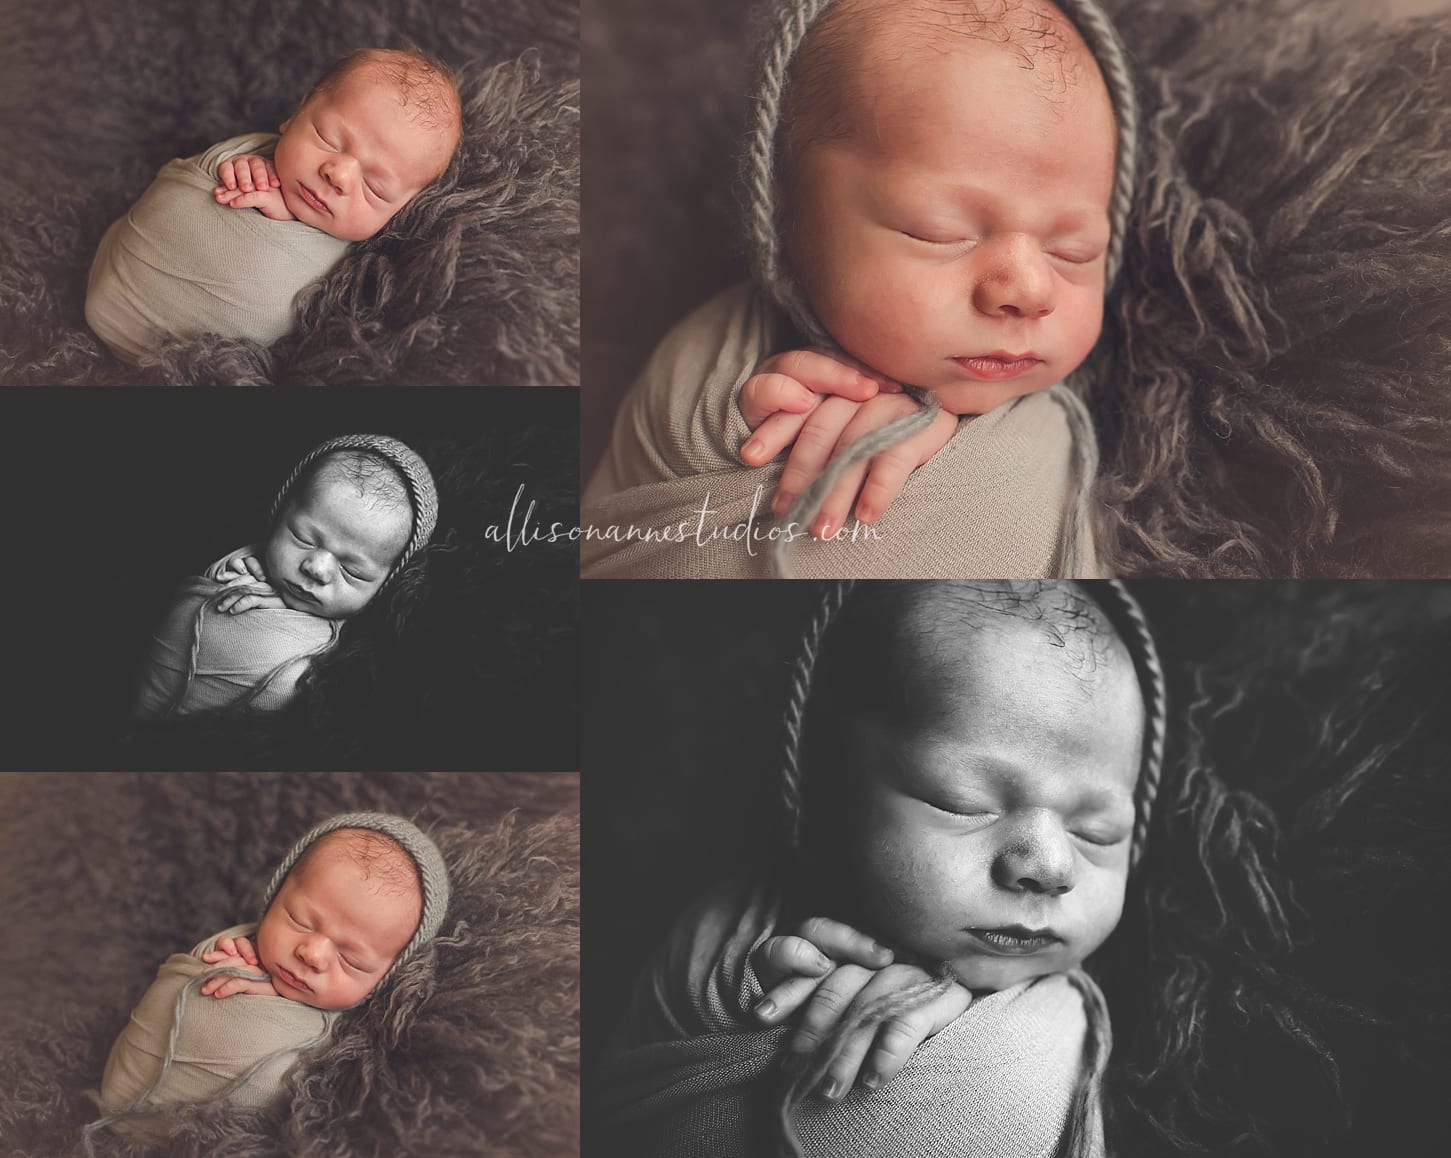 Christopher, baby biceps, SOILD training, friends, newborn sessions, best photographer in south jersey, Allison Gallagher, love, Hammonton, AllisonAnne Studios, local, small business, studio sessions, scrabble